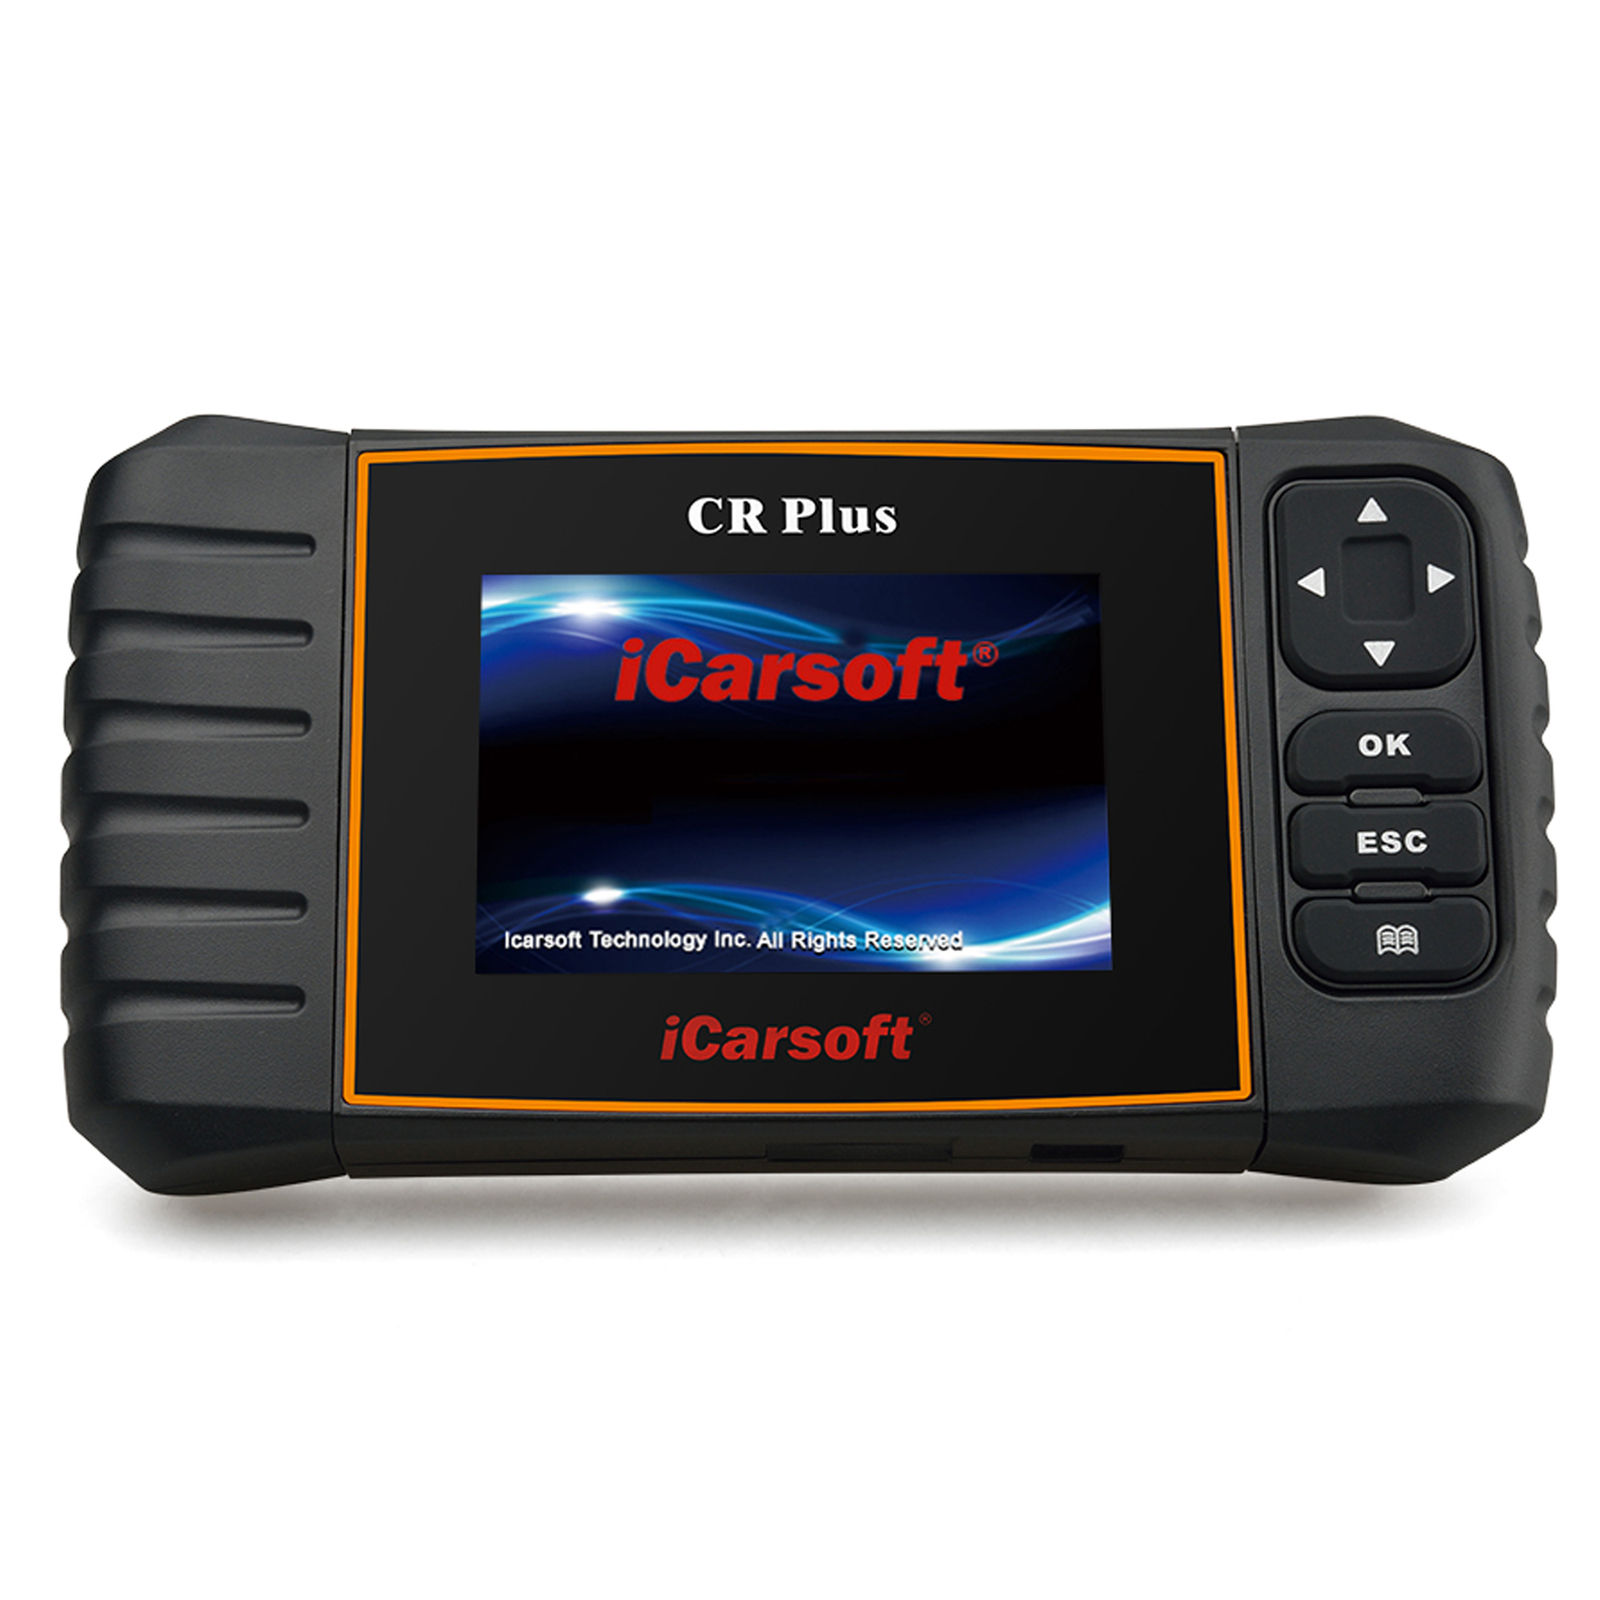 iCarsoft CRPLUS OBDII Diagnostic Scan Tool 40+ Car Coverage EPB, Oil  Service Rest and SAS Reset